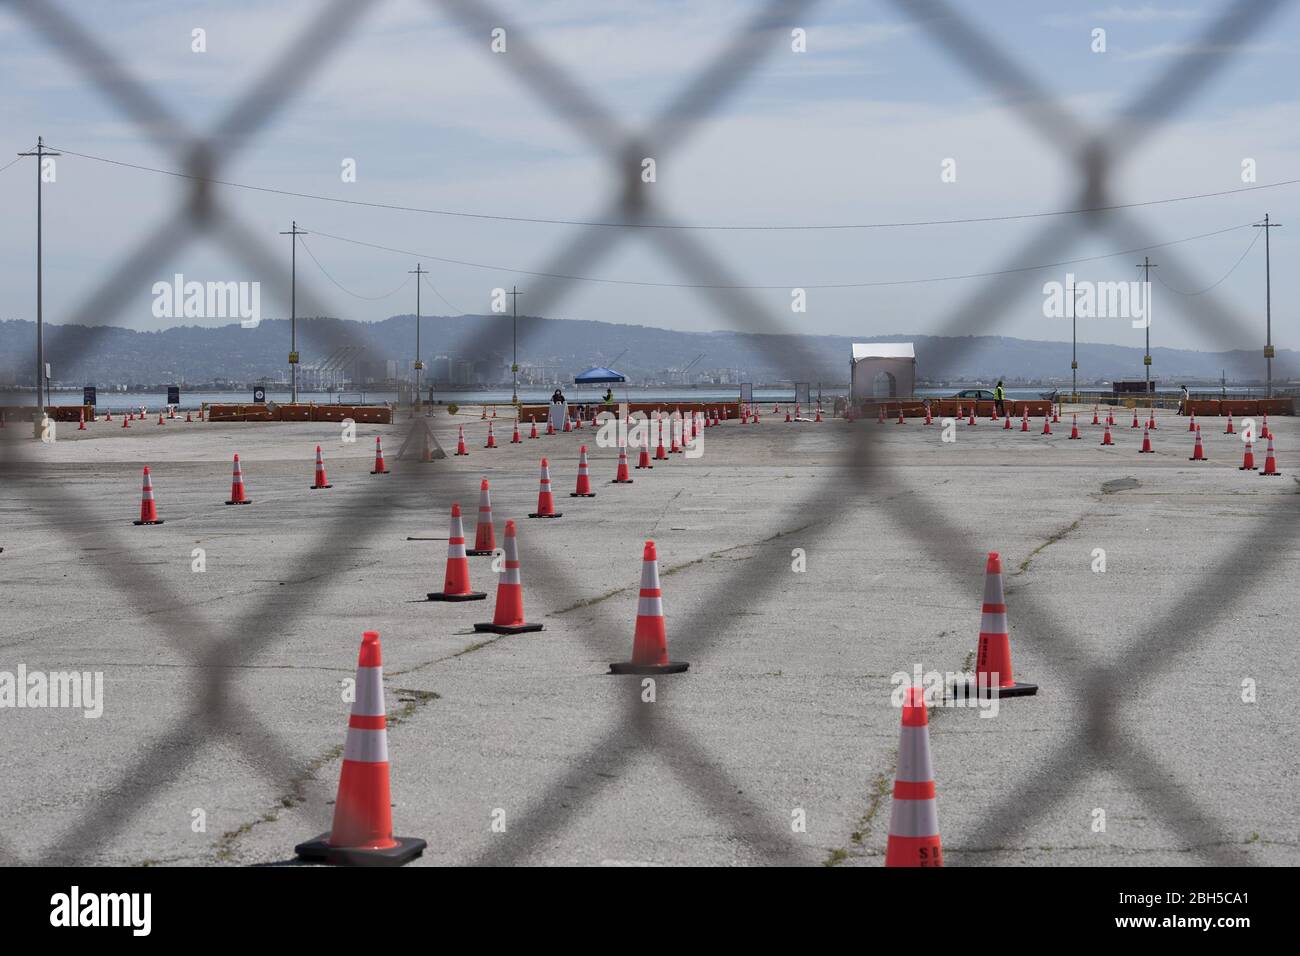 San Francisco, United States. 23rd Apr, 2020. Cones are set up for autos to line up for coronabvirus testing at a site on the Embarcadero tn San Francisco on Thursday, April 23, 2020. San Francisco has set up drive through coronavirus testing by appointment. Photo by Terry Schmitt/UPI Credit: UPI/Alamy Live News Stock Photo